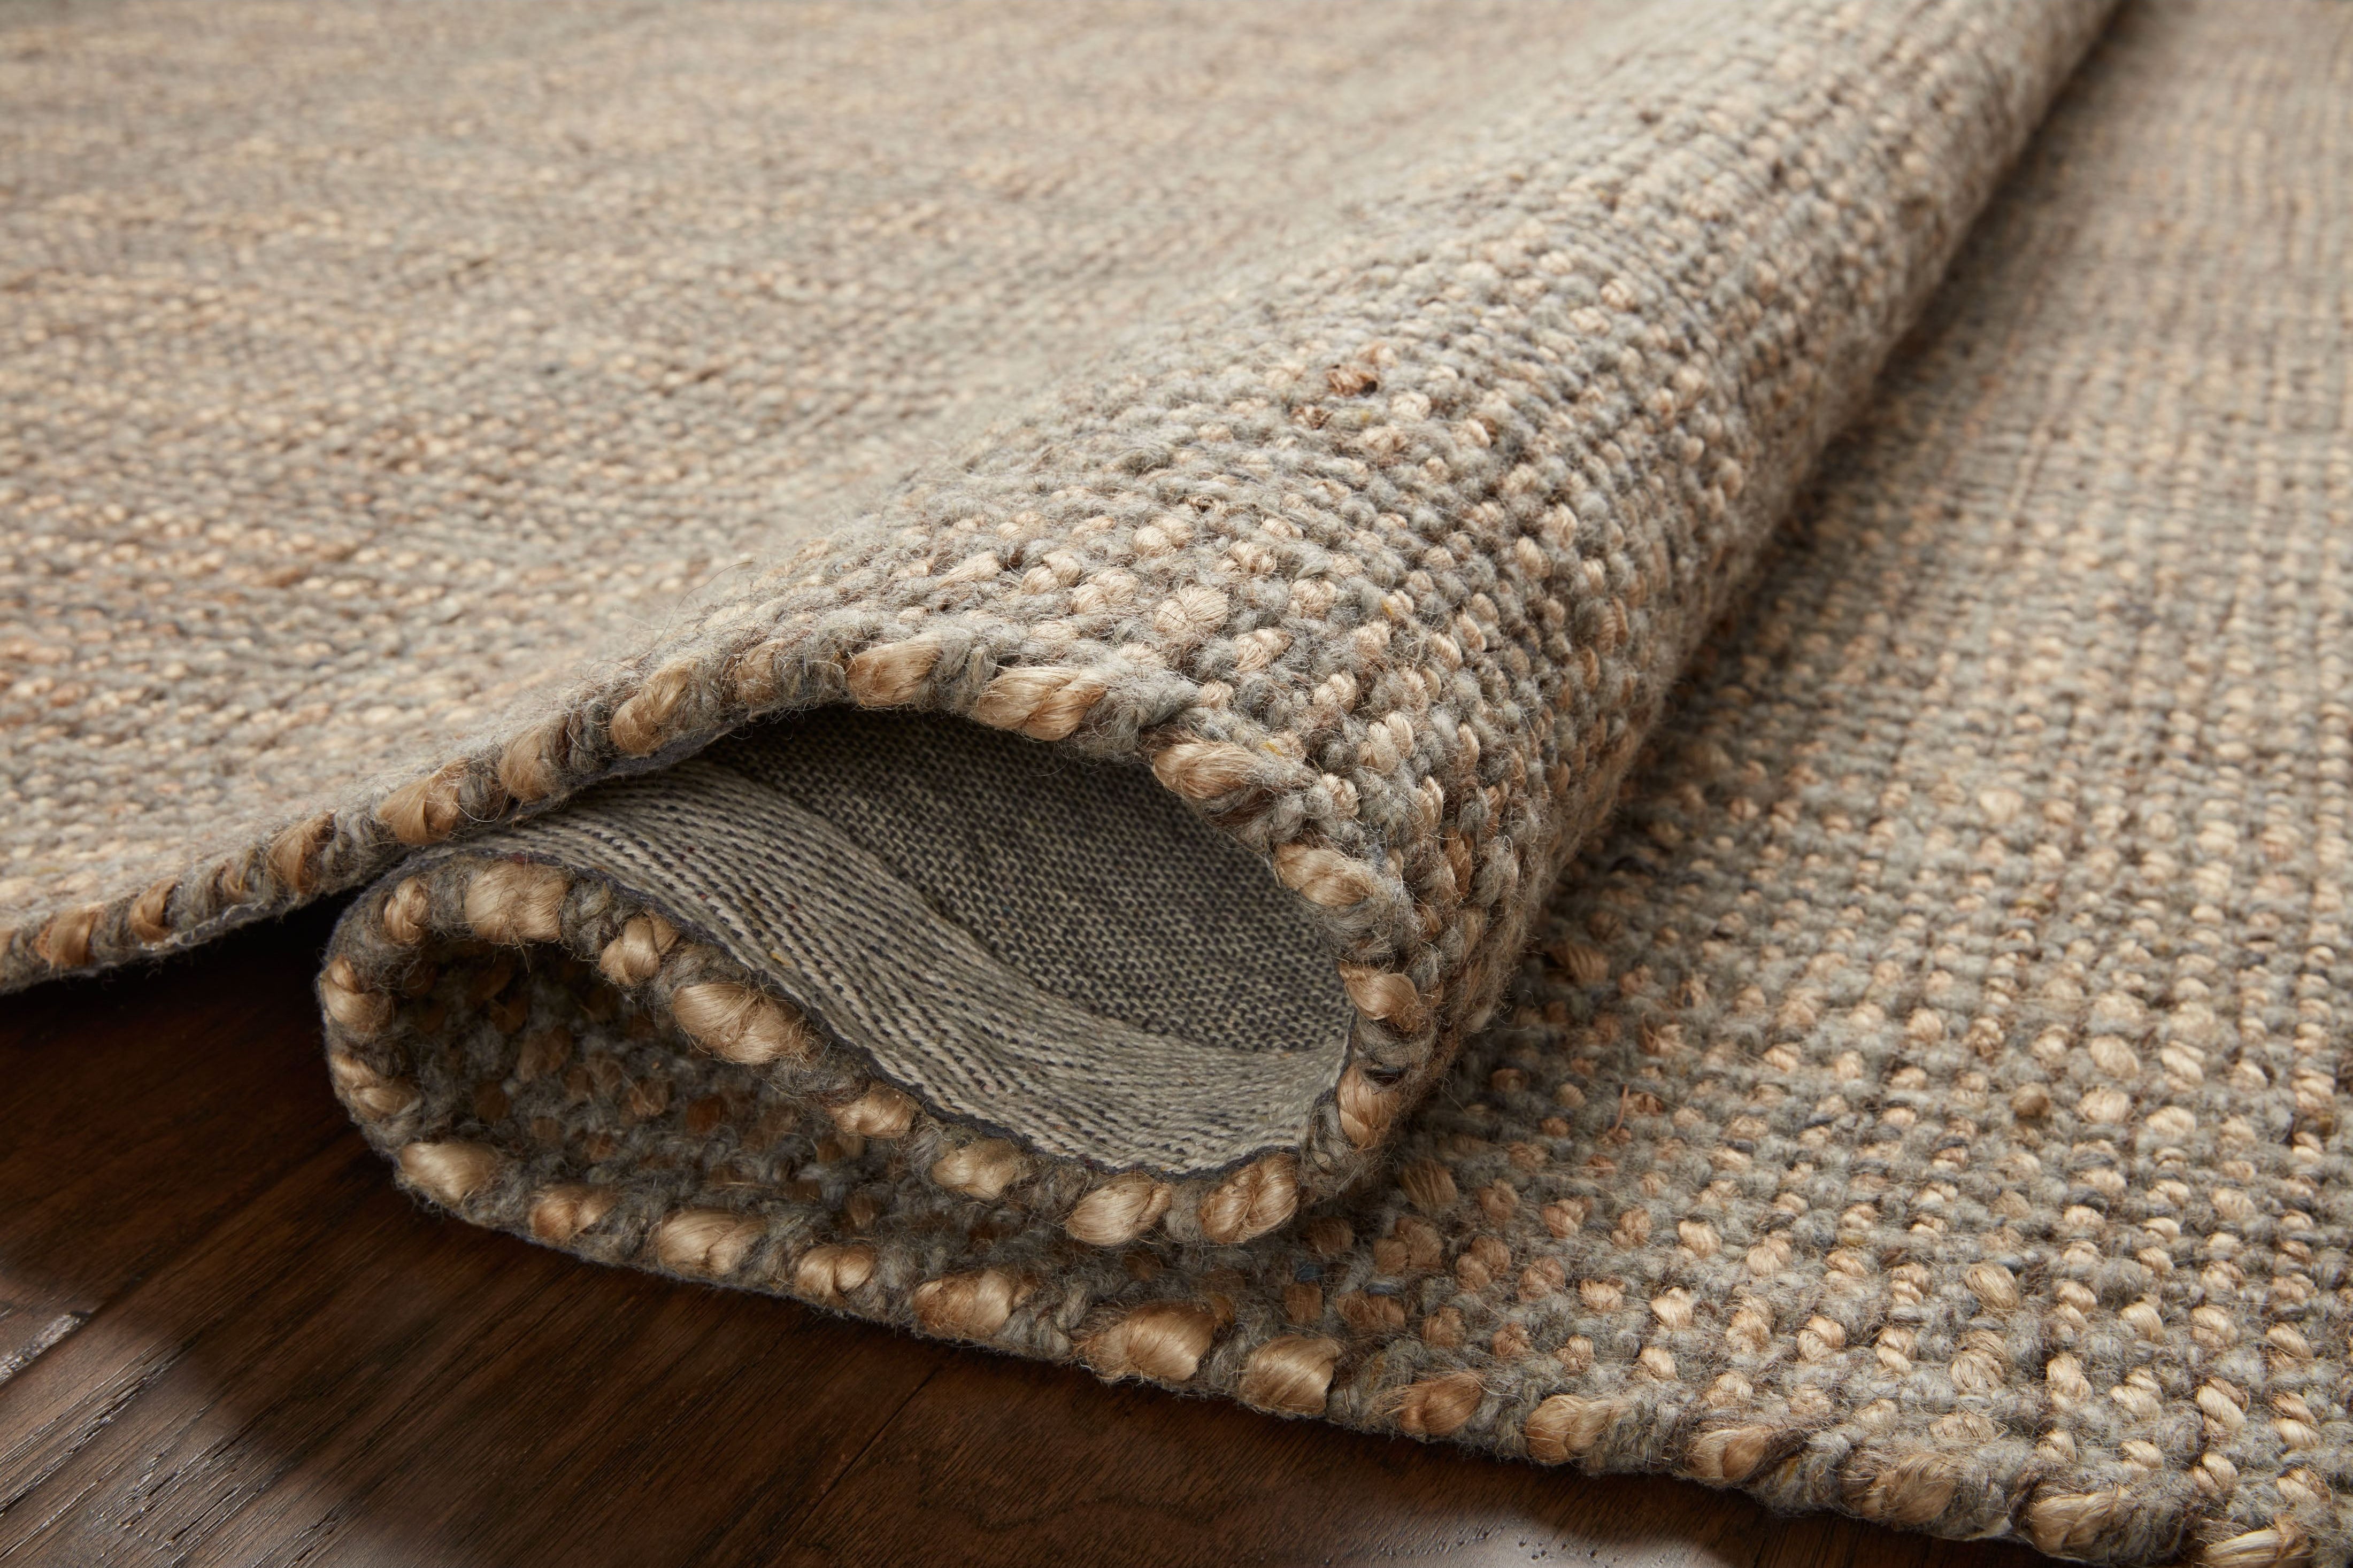 Hand-woven of jute and wool, the Cornwall Mocha / Natural Rug has a natural, organic look with a clean and classic striped design. This area rug collection is an elegant neutral that styles easily in a range of living rooms, bedrooms, dining rooms, and even mudrooms. Soft, earth-toned colors complement the rug’s natural materials and aesthetic. Amethyst Home provides interior design, new construction, custom furniture, and area rugs in the Omaha metro area.